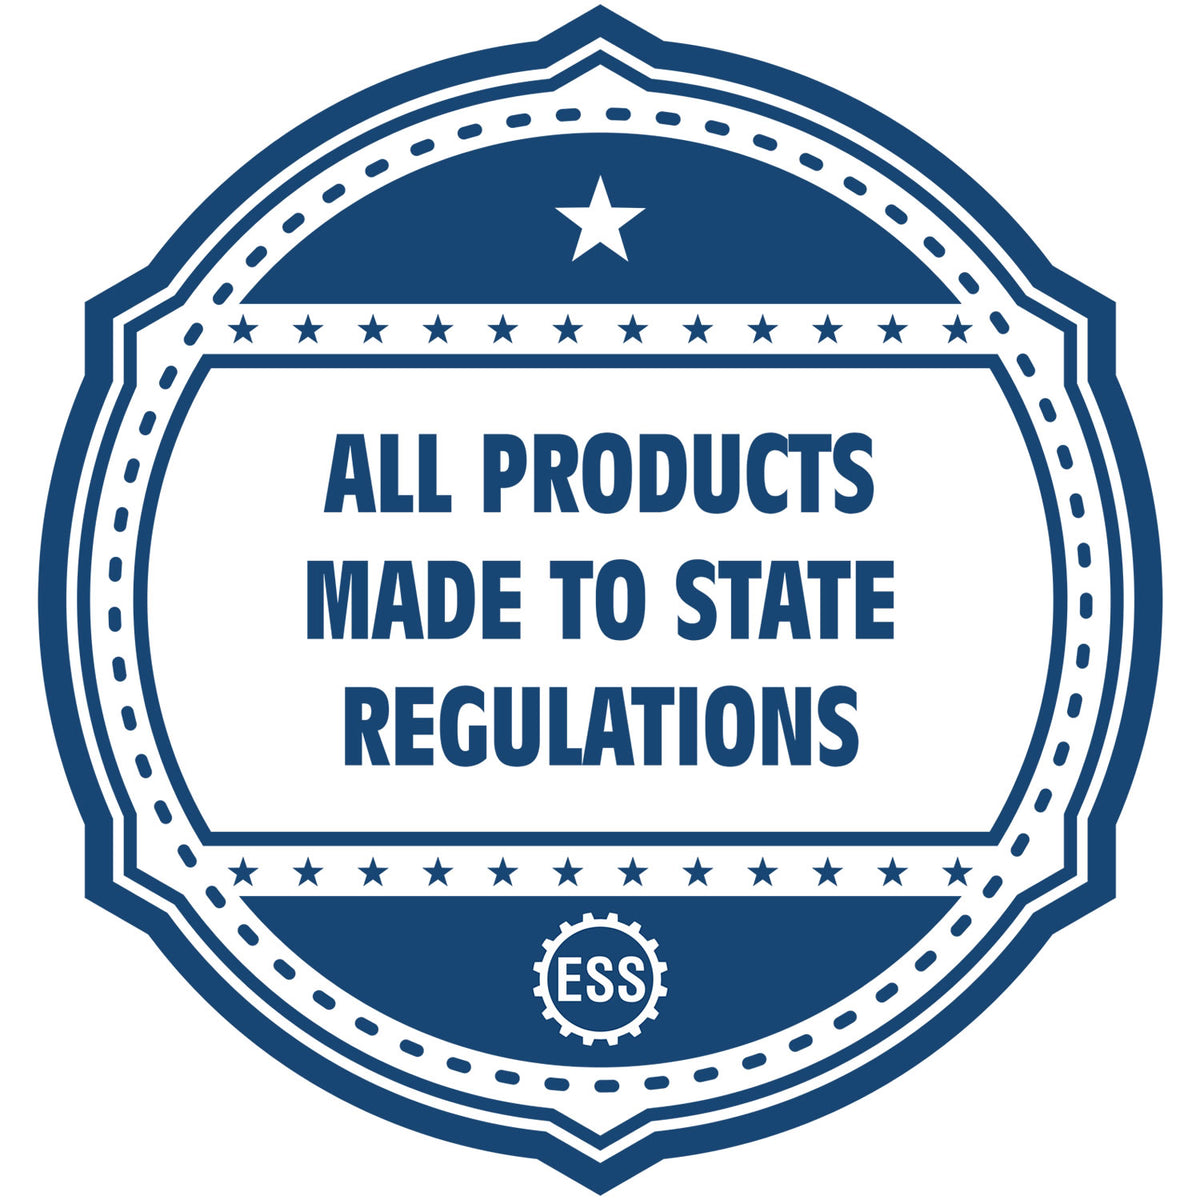 A blue icon or badge for the Gift Kentucky Architect Seal showing that this product is made in compliance with state regulations.